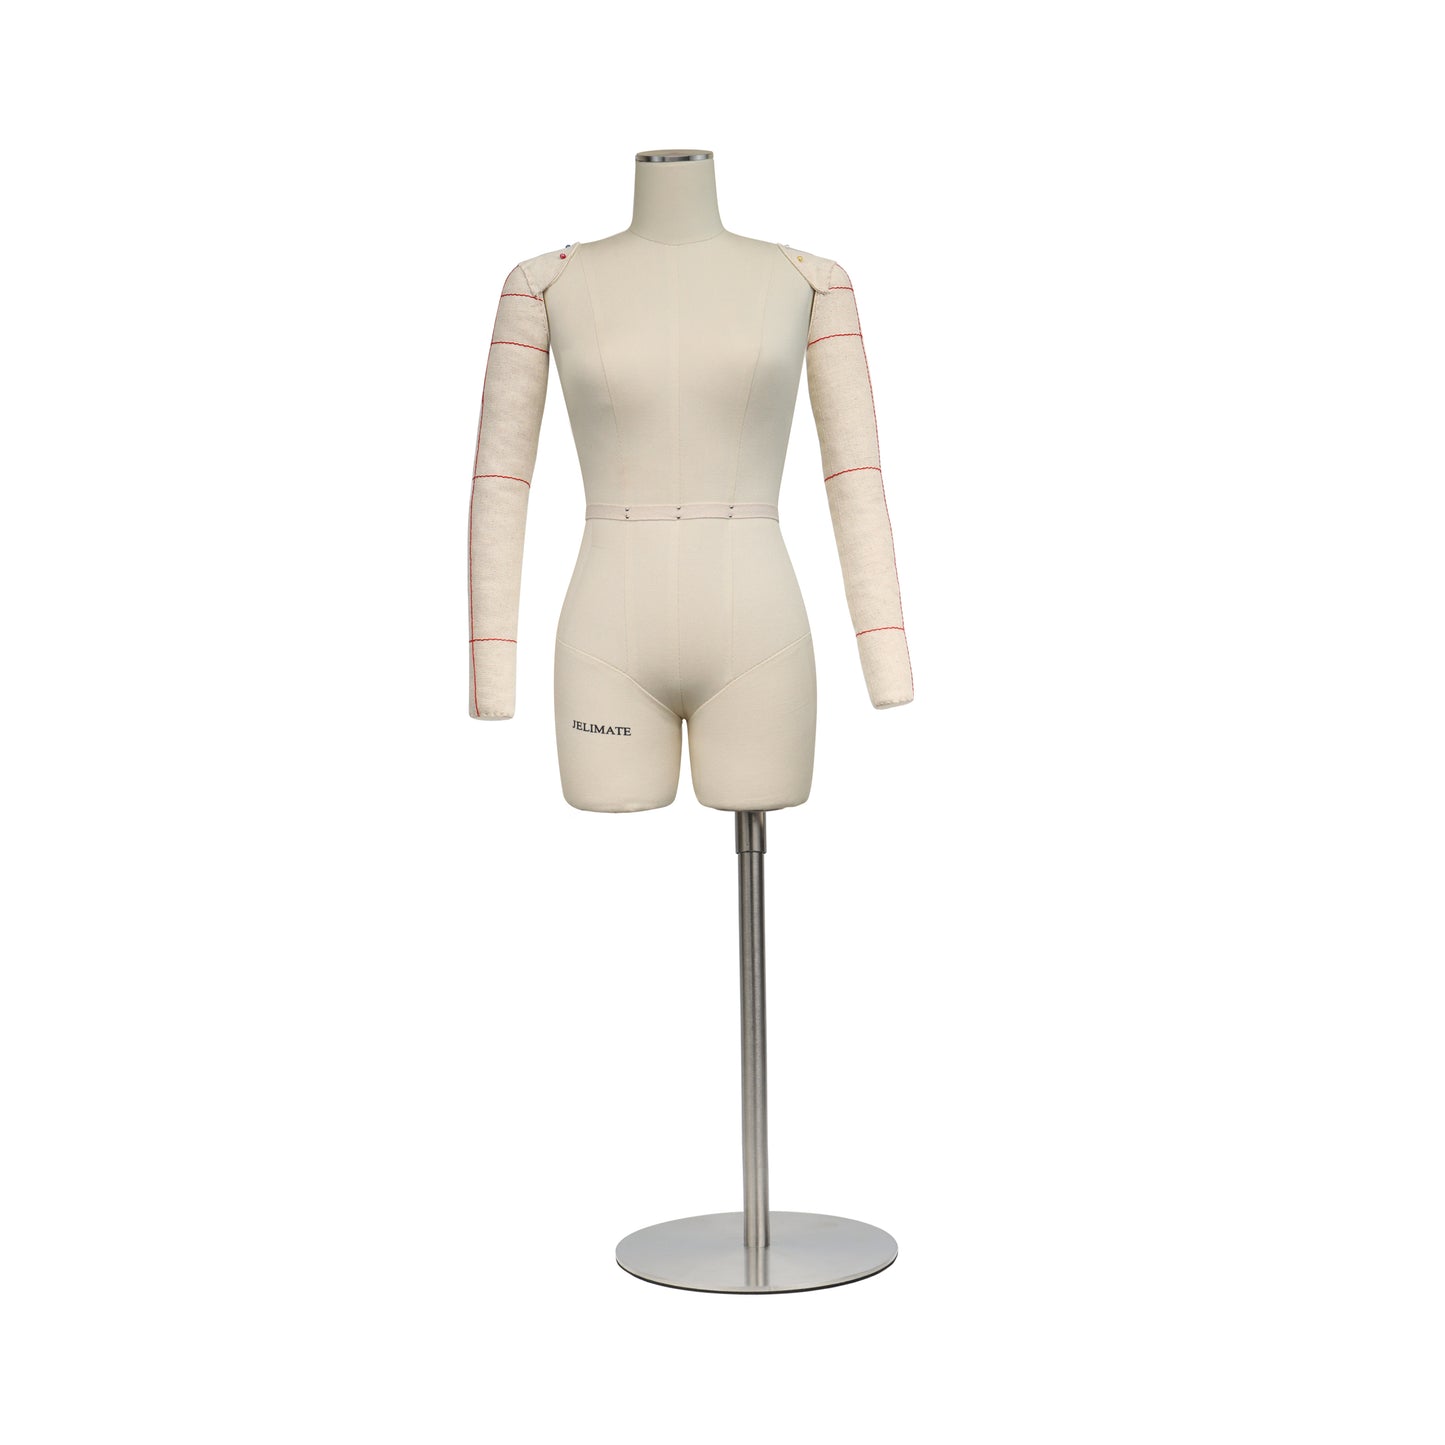 JMSIZE12 Half Scale Female Dress Form For Pattern Making,1/2 Scale Miniature Sewing Mannequin for Women,Mini Tailor Mannequin for Fashion Designer Fashion School Draping Mannequin